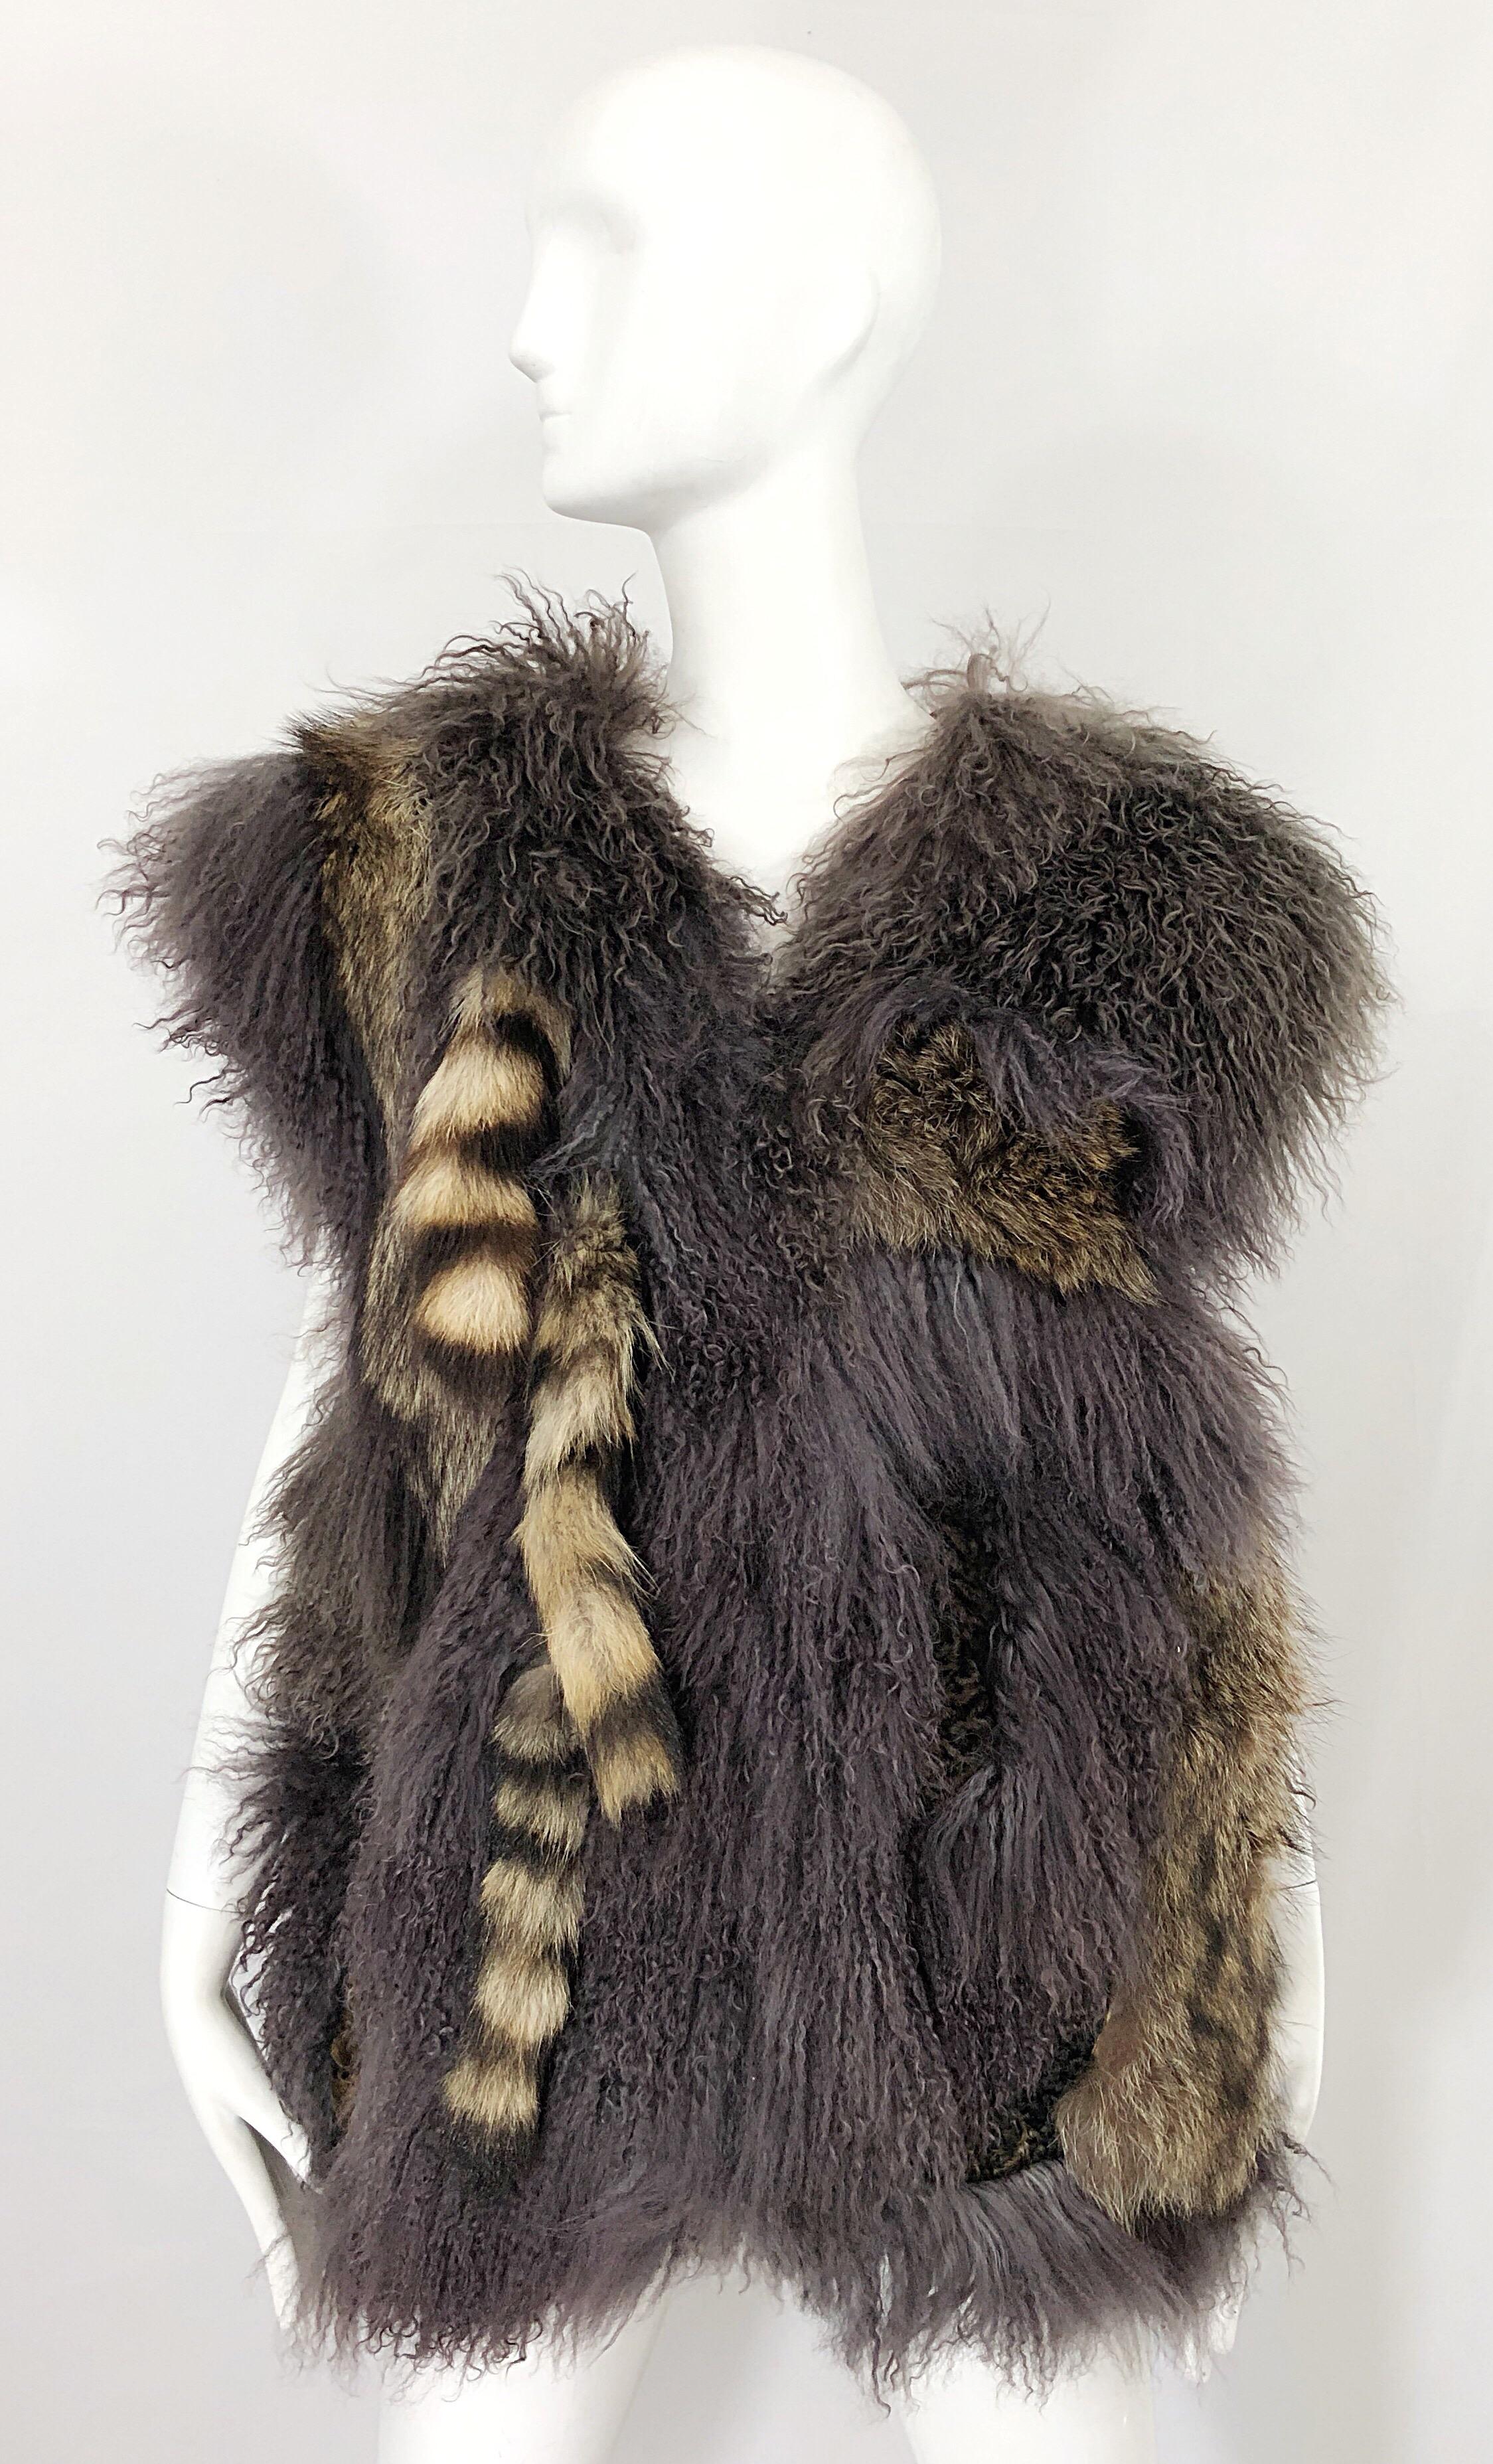 Avant Garde AMEN WARDY 1980s mixed fur and leather grey and brown sleeveless 80s vest! Features luxurious Mongolian fur, Raccoon fur tails, Fox fur, and brown leather throughout. Two strong fabric covered hook-and-eye fur closures up the front.